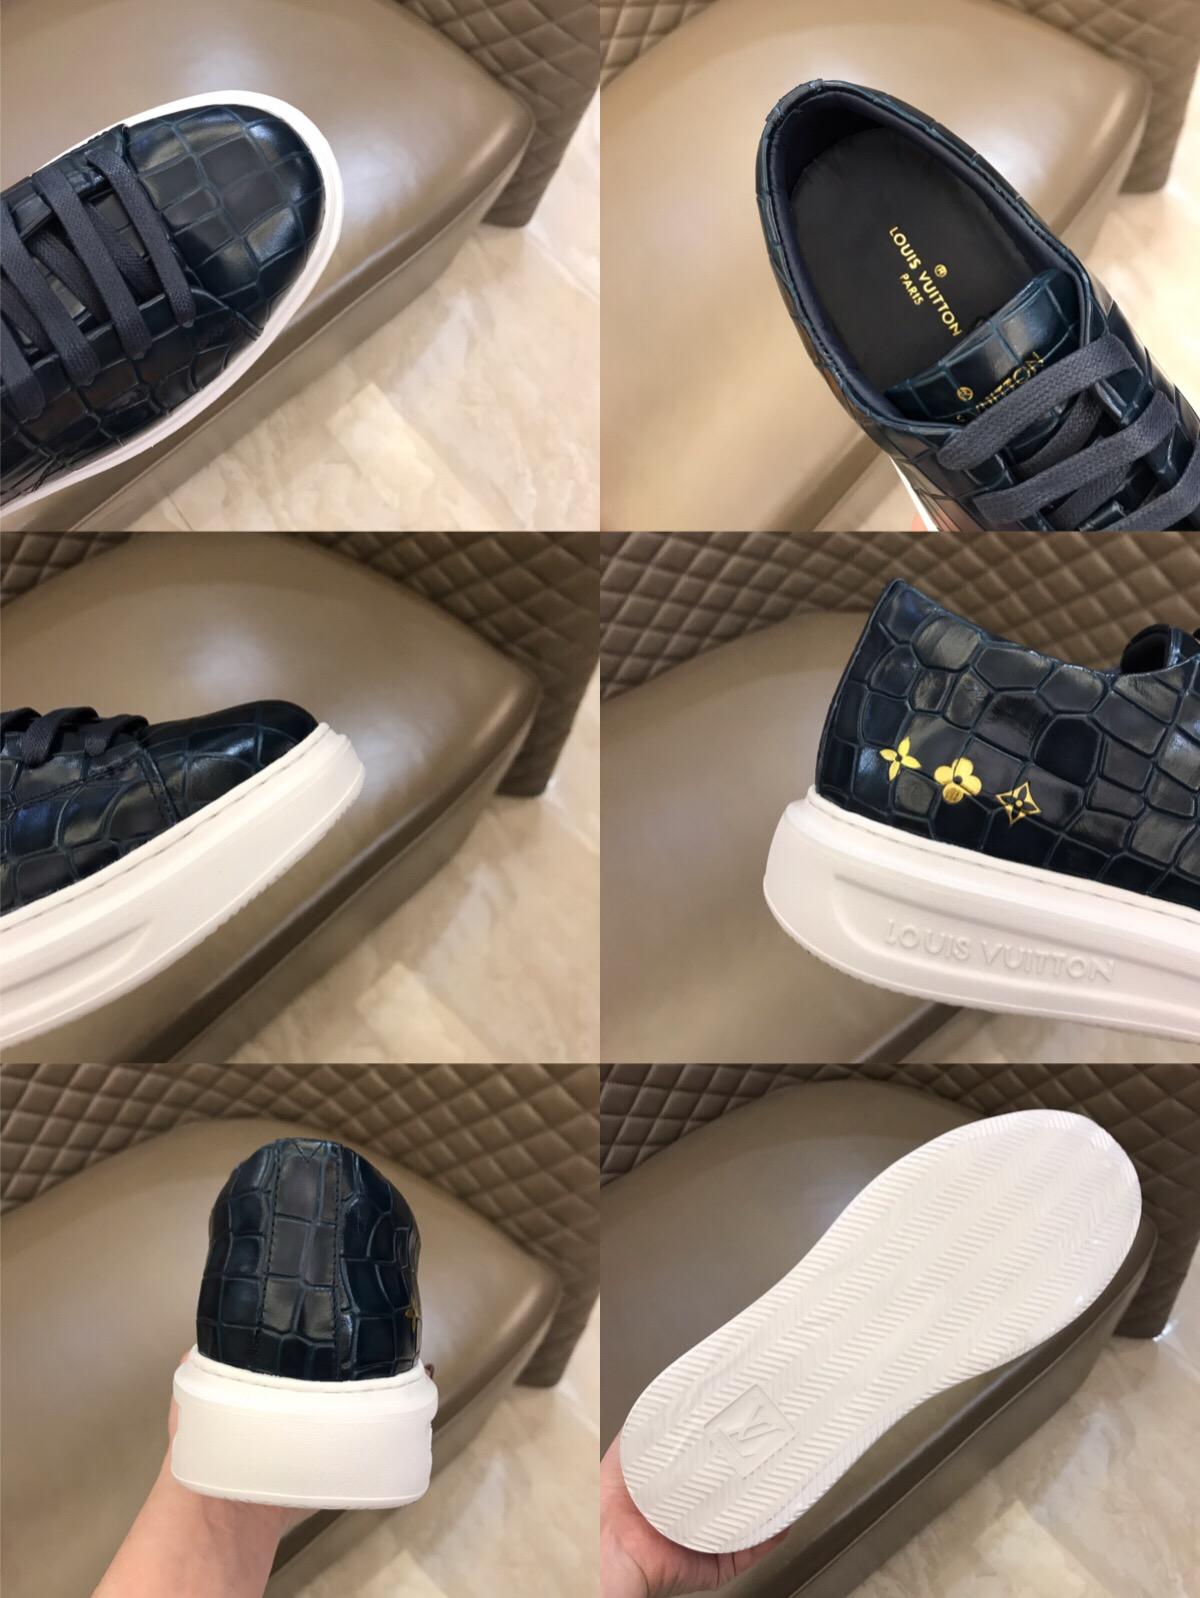 lv Fashion Sneakers Black crocodile leather and gold Monogram Flower motif with white sole MS02877